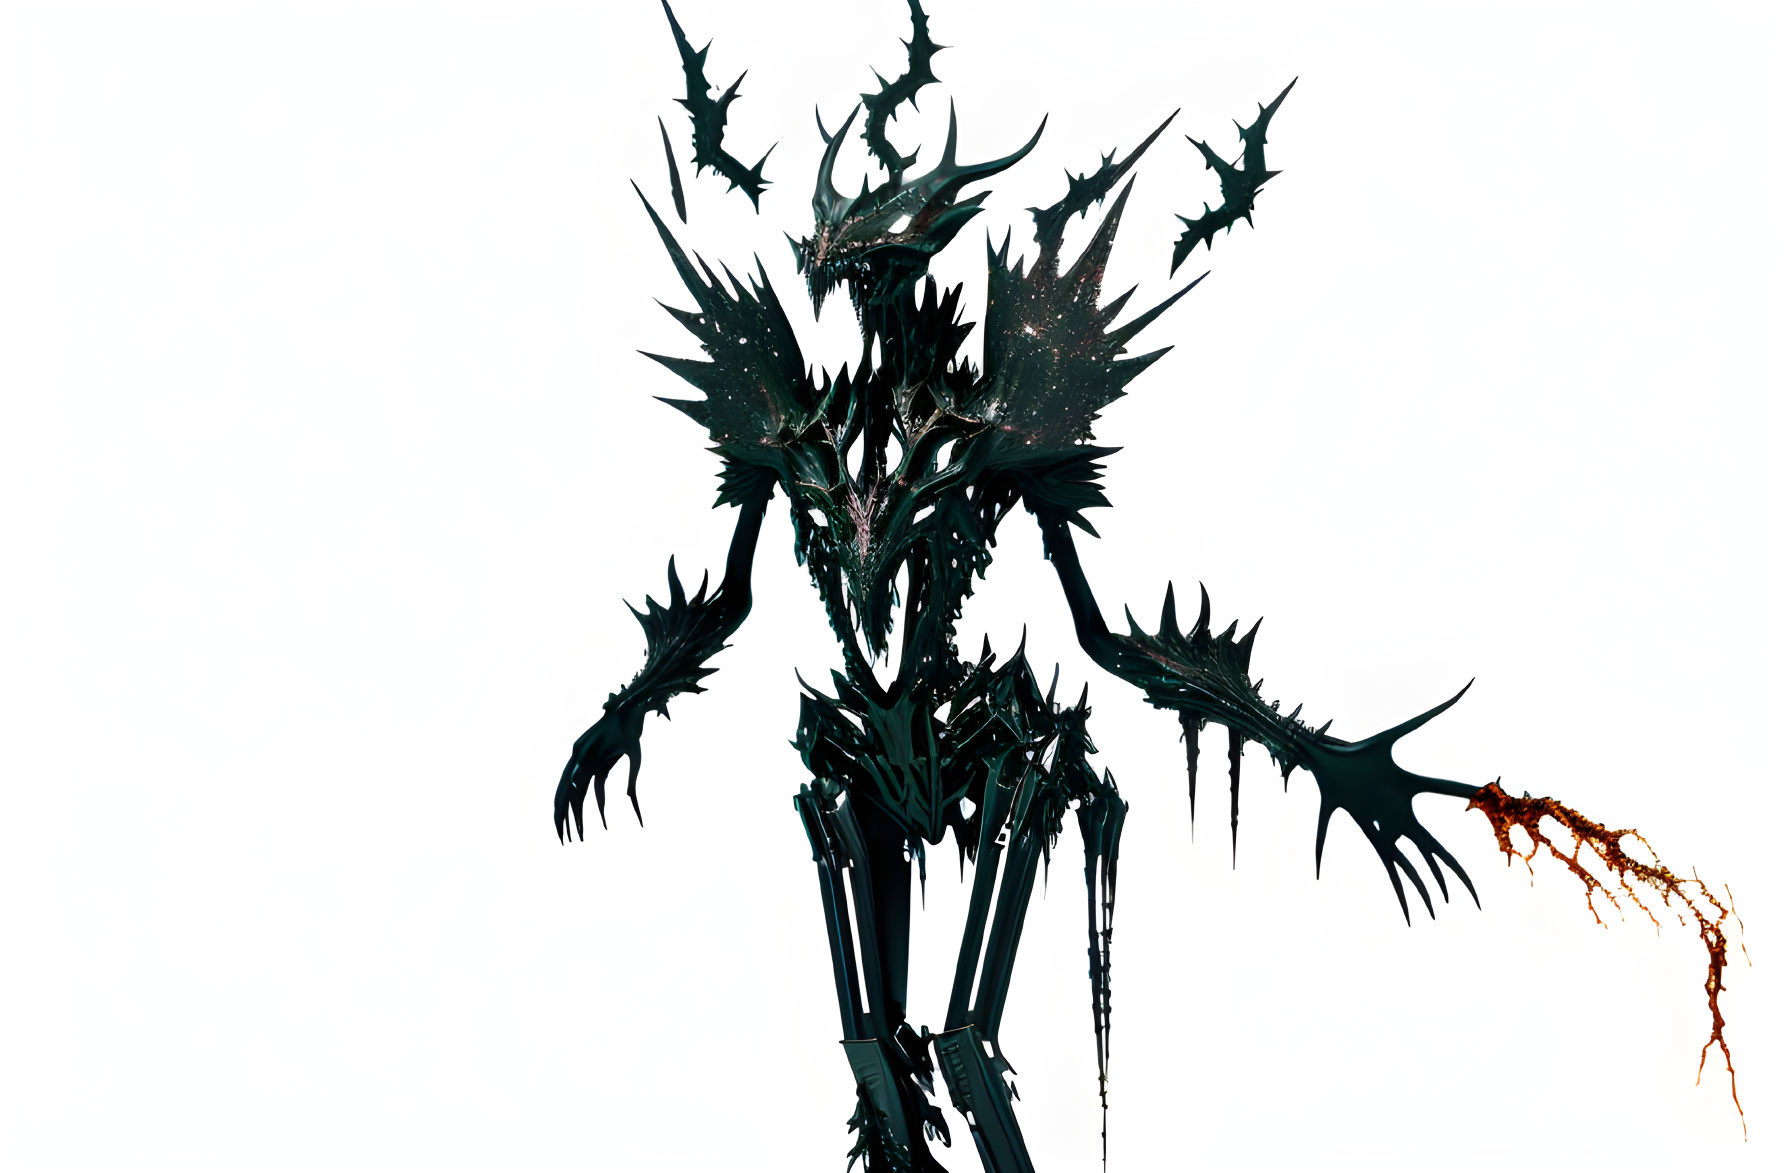 Dark-hued mechanical creature with spiky extensions and sharp claws.